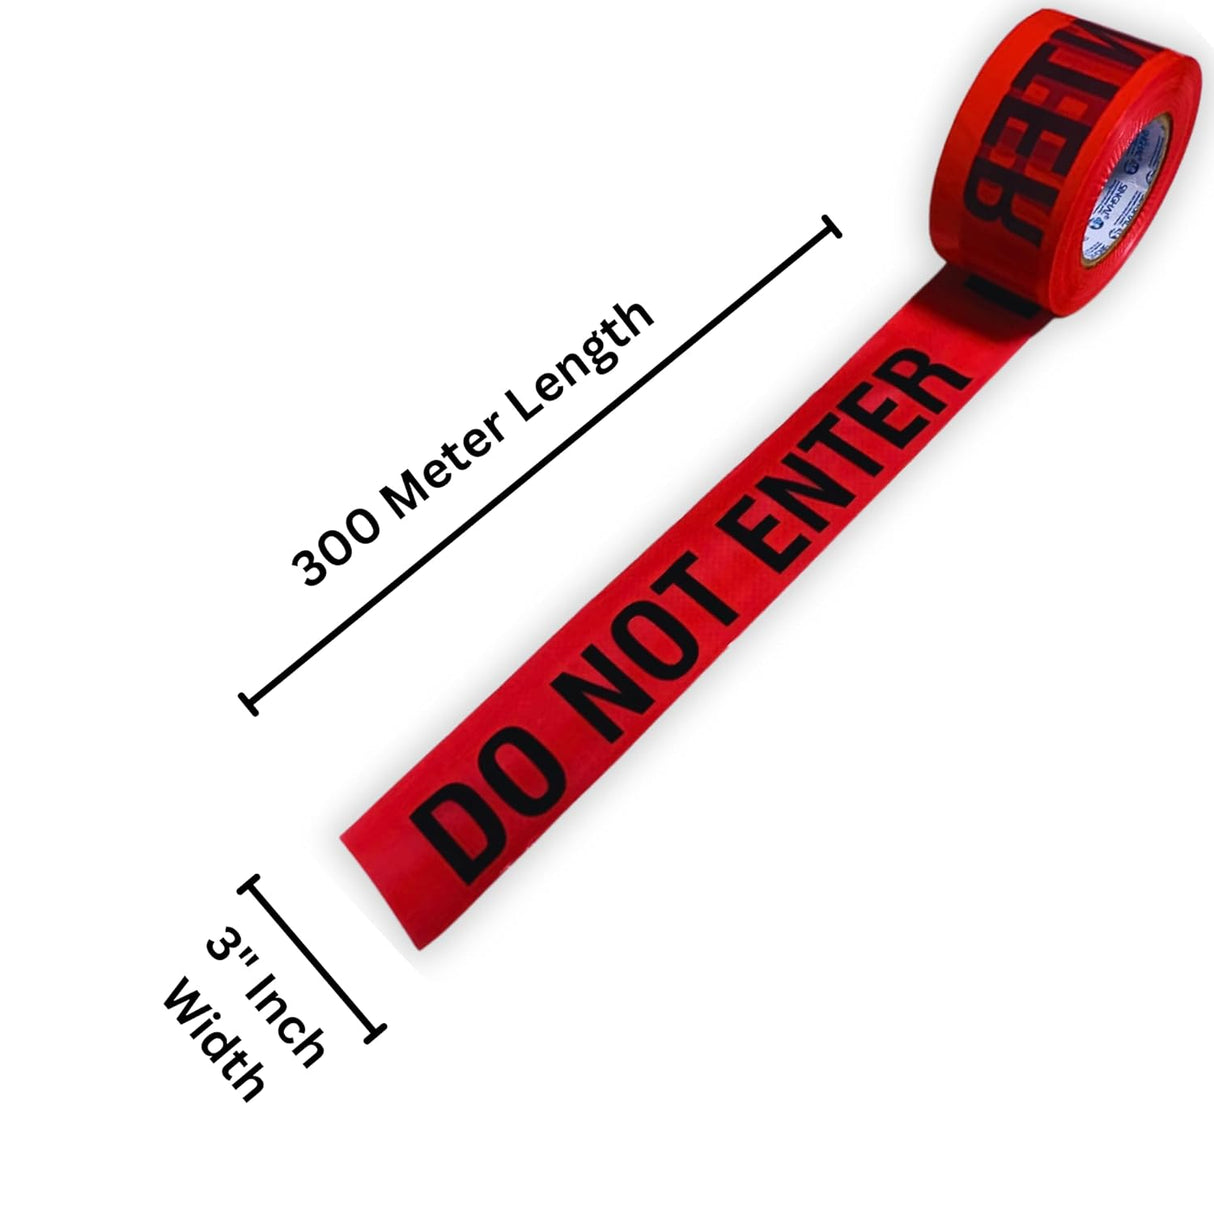 SINGHAL Do Not Enter Barricade Tape 3 Inch X 300 Meter, Red with Bold Black Print, Wide for Maximum Readability, Tear Resistant Design, High Visibility 300mtr Pack of 3